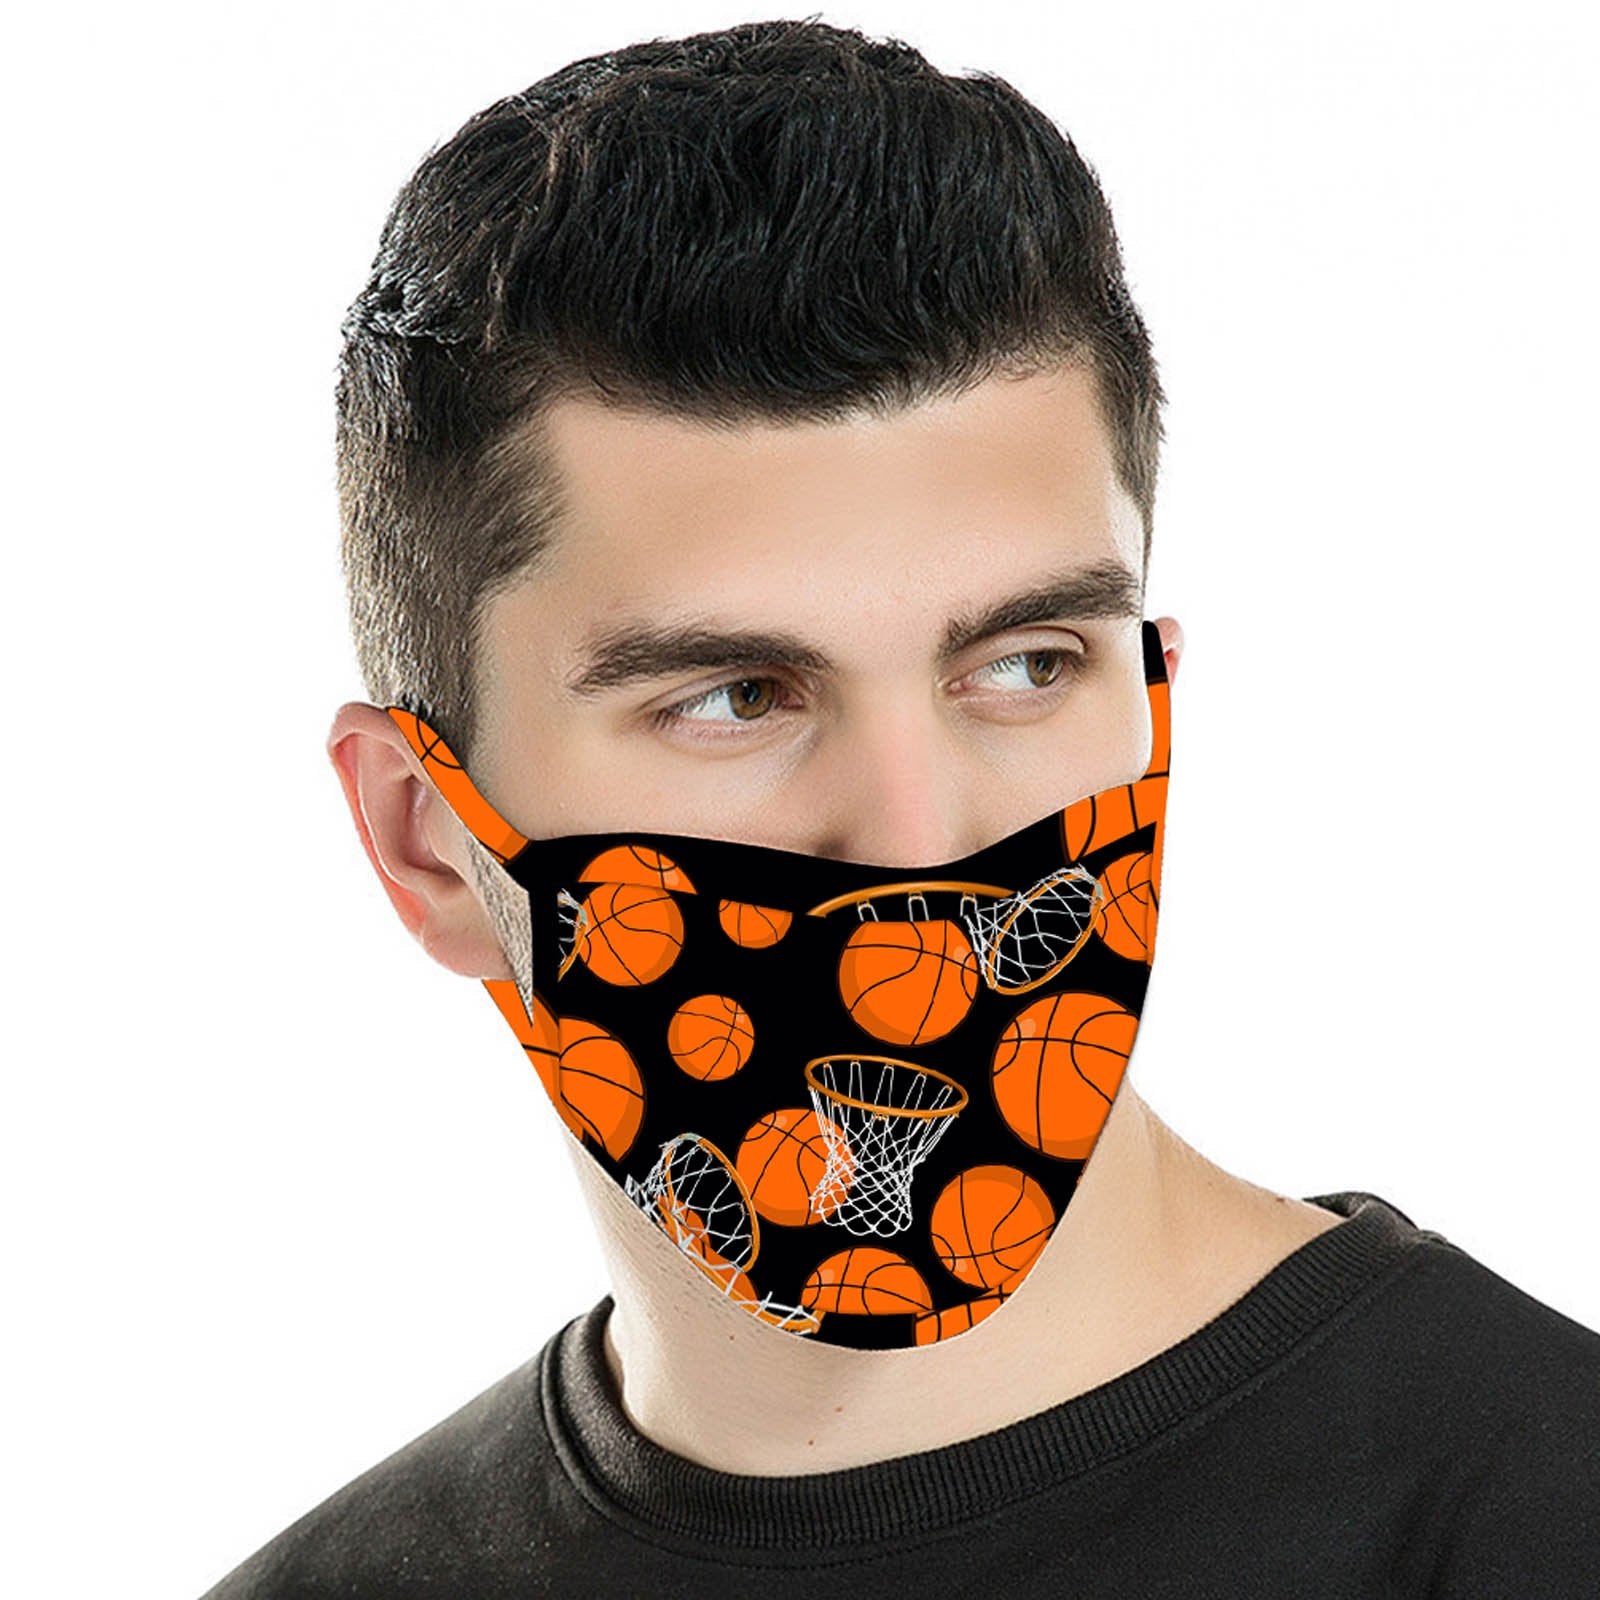 FCM-049 American Bling  Basket Ball and Hoops Print Cloth Face Mask -1Pcs